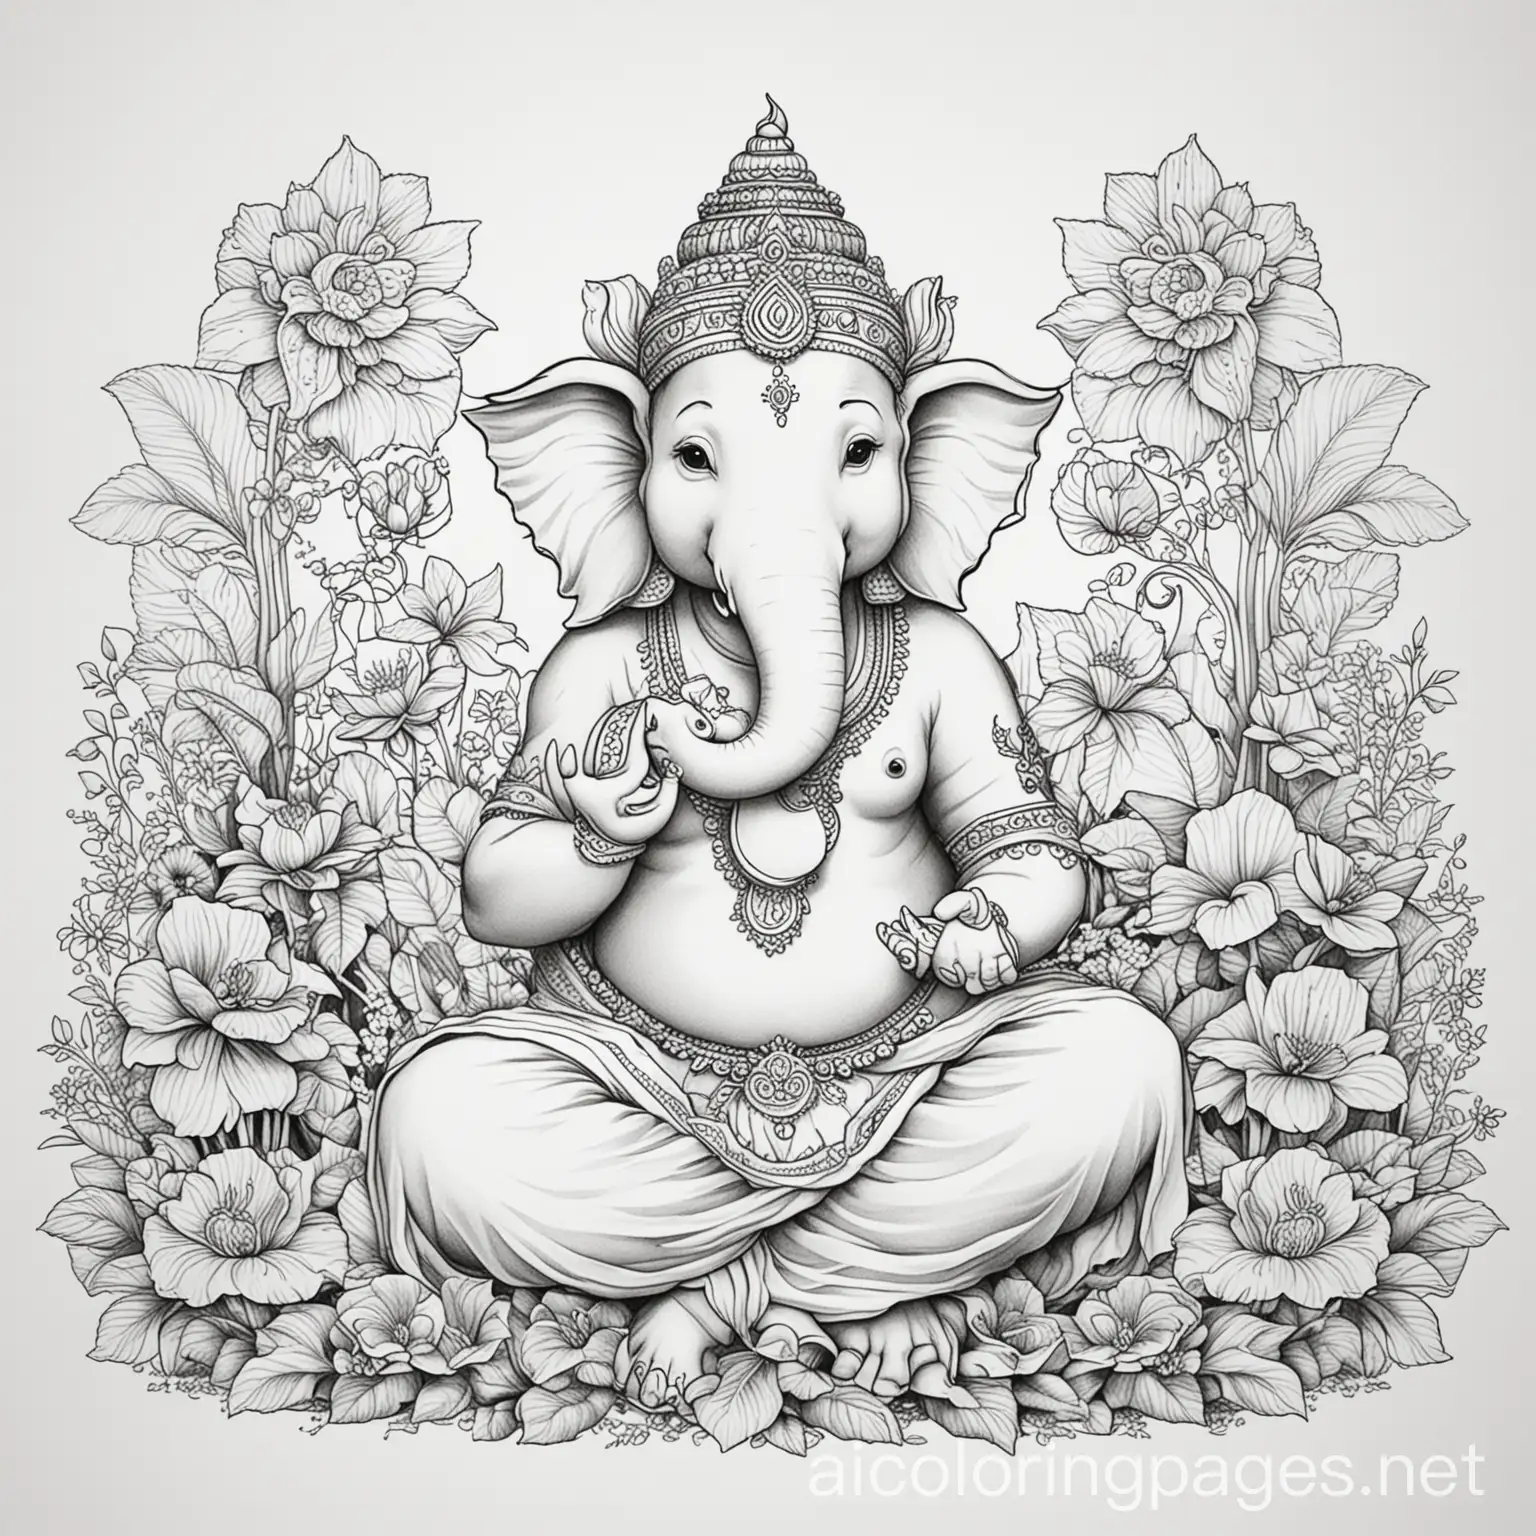 ganesh sitting in a gardenw with flowers around him, Coloring Page, black and white, line art, white background, Simplicity, Ample White Space. The background of the coloring page is plain white to make it easy for young children to color within the lines. The outlines of all the subjects are easy to distinguish, making it simple for kids to color without too much difficulty